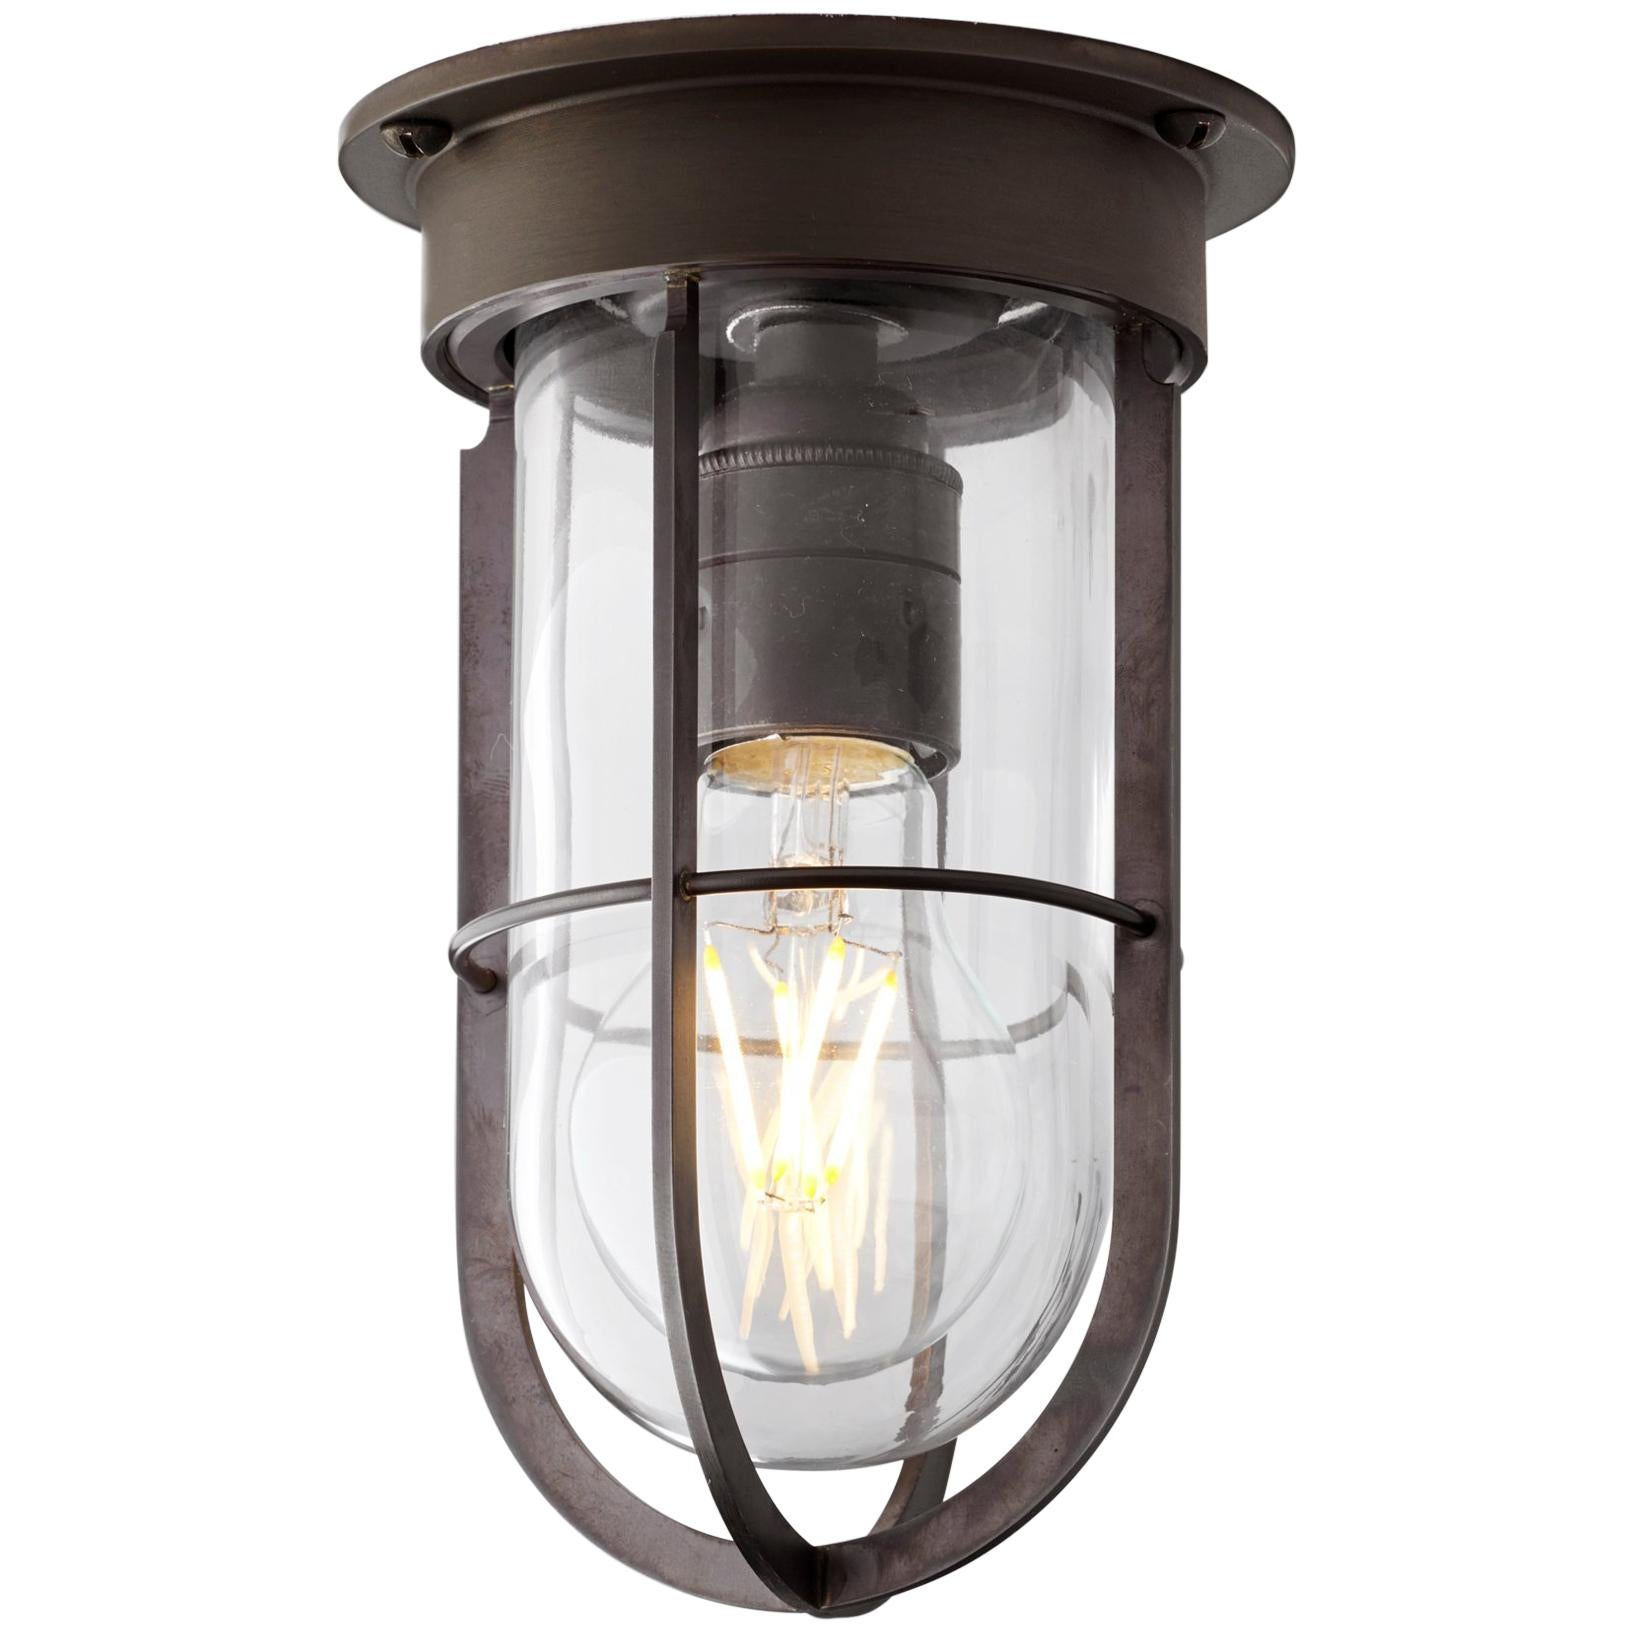 Tekna Docklight Ceiling Light with Dark Bronze Finish and Clear Glass